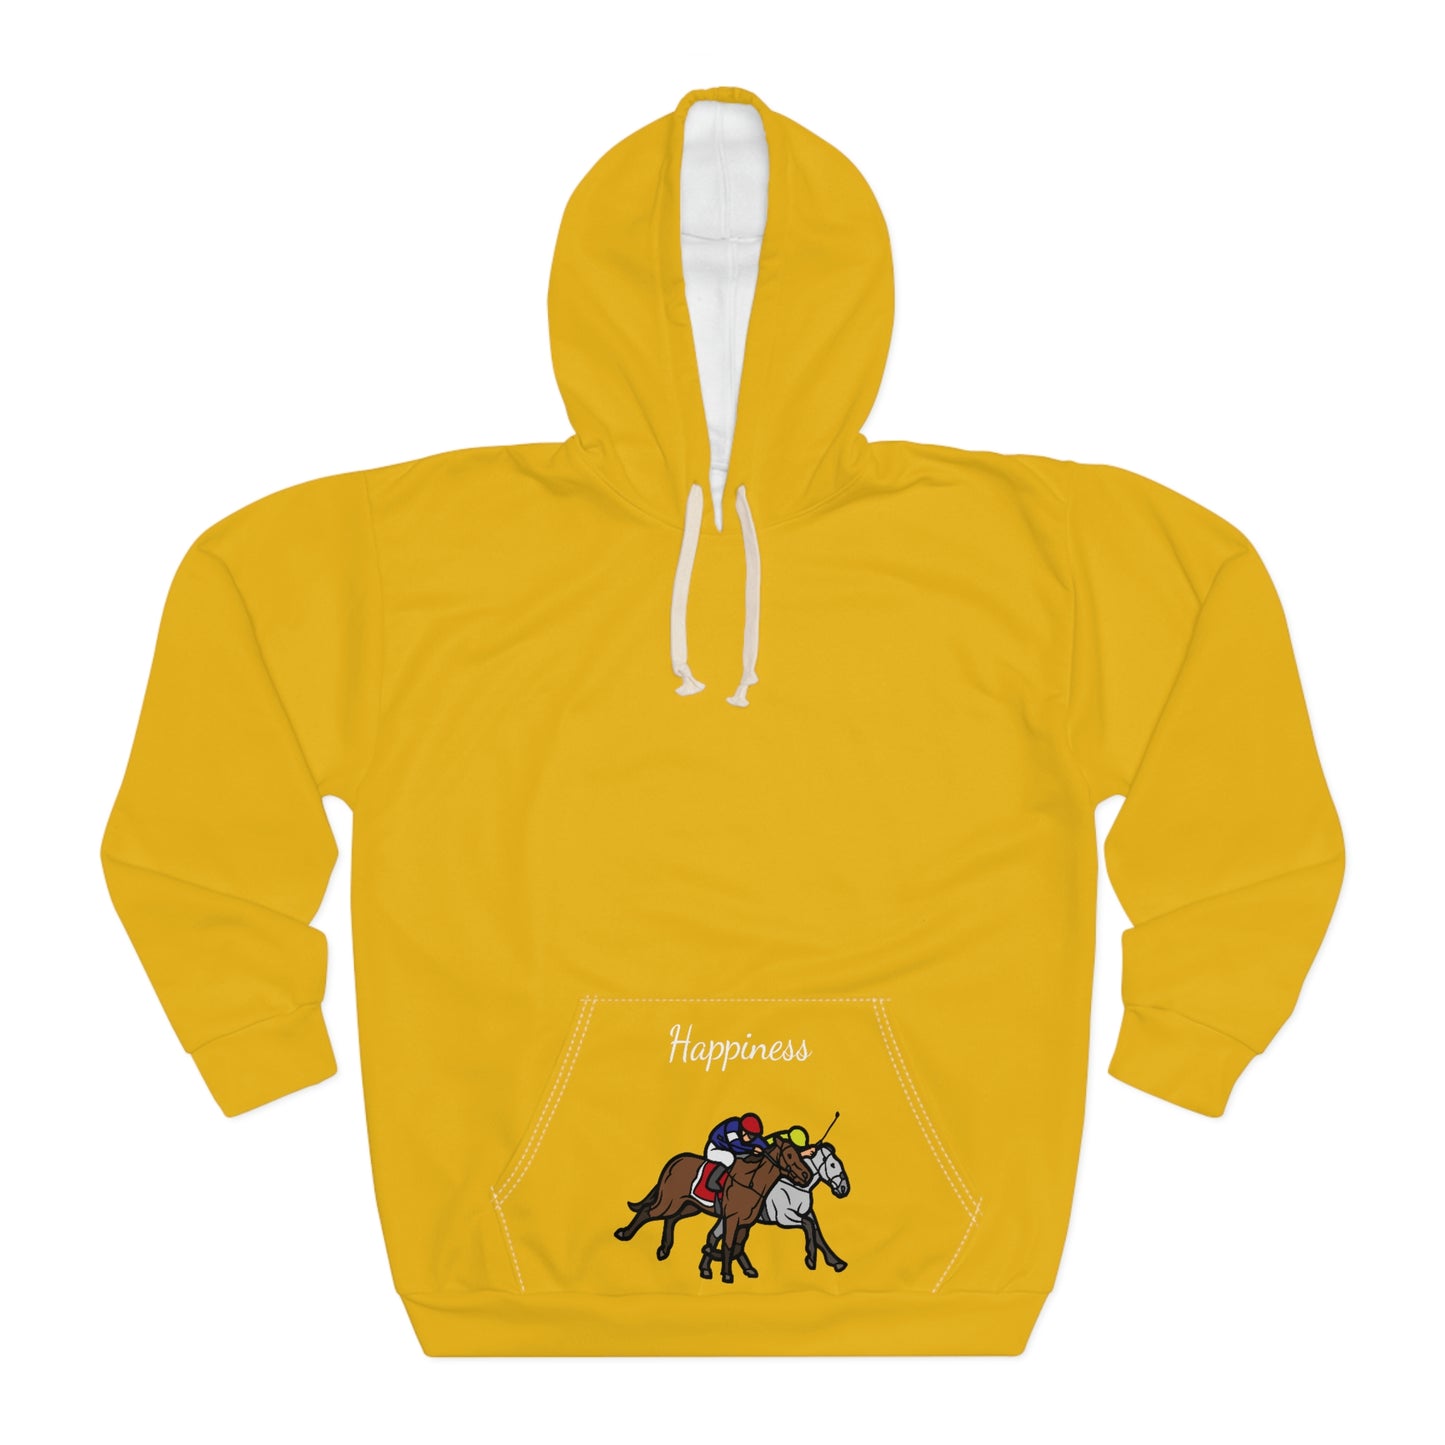 Spread Happiness and Love for Horses with Our Happiness Hoodie - Perfect for Horse Lovers, Owners, and Farm Enthusiasts!